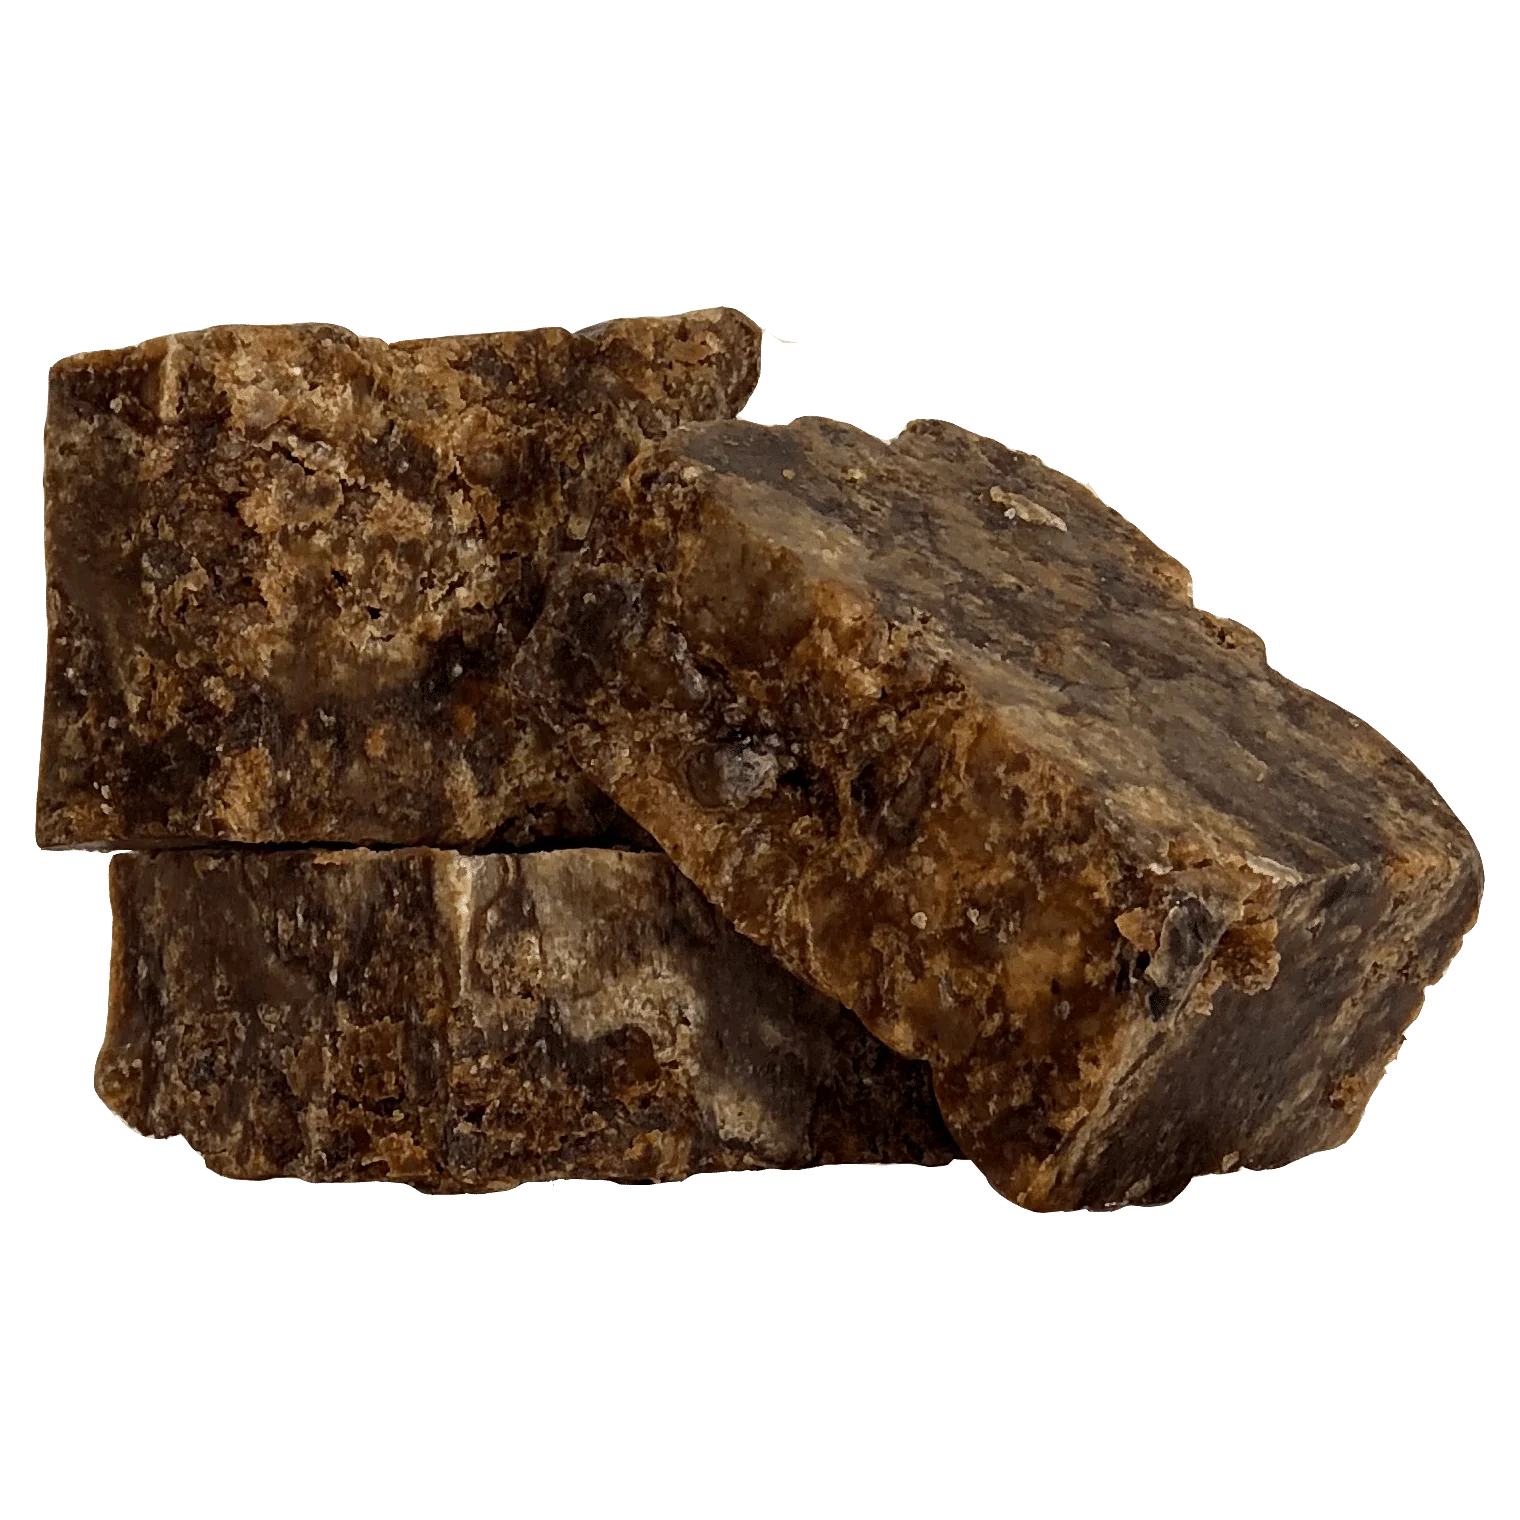 WHAT IS AFRICAN BLACK SOAP?